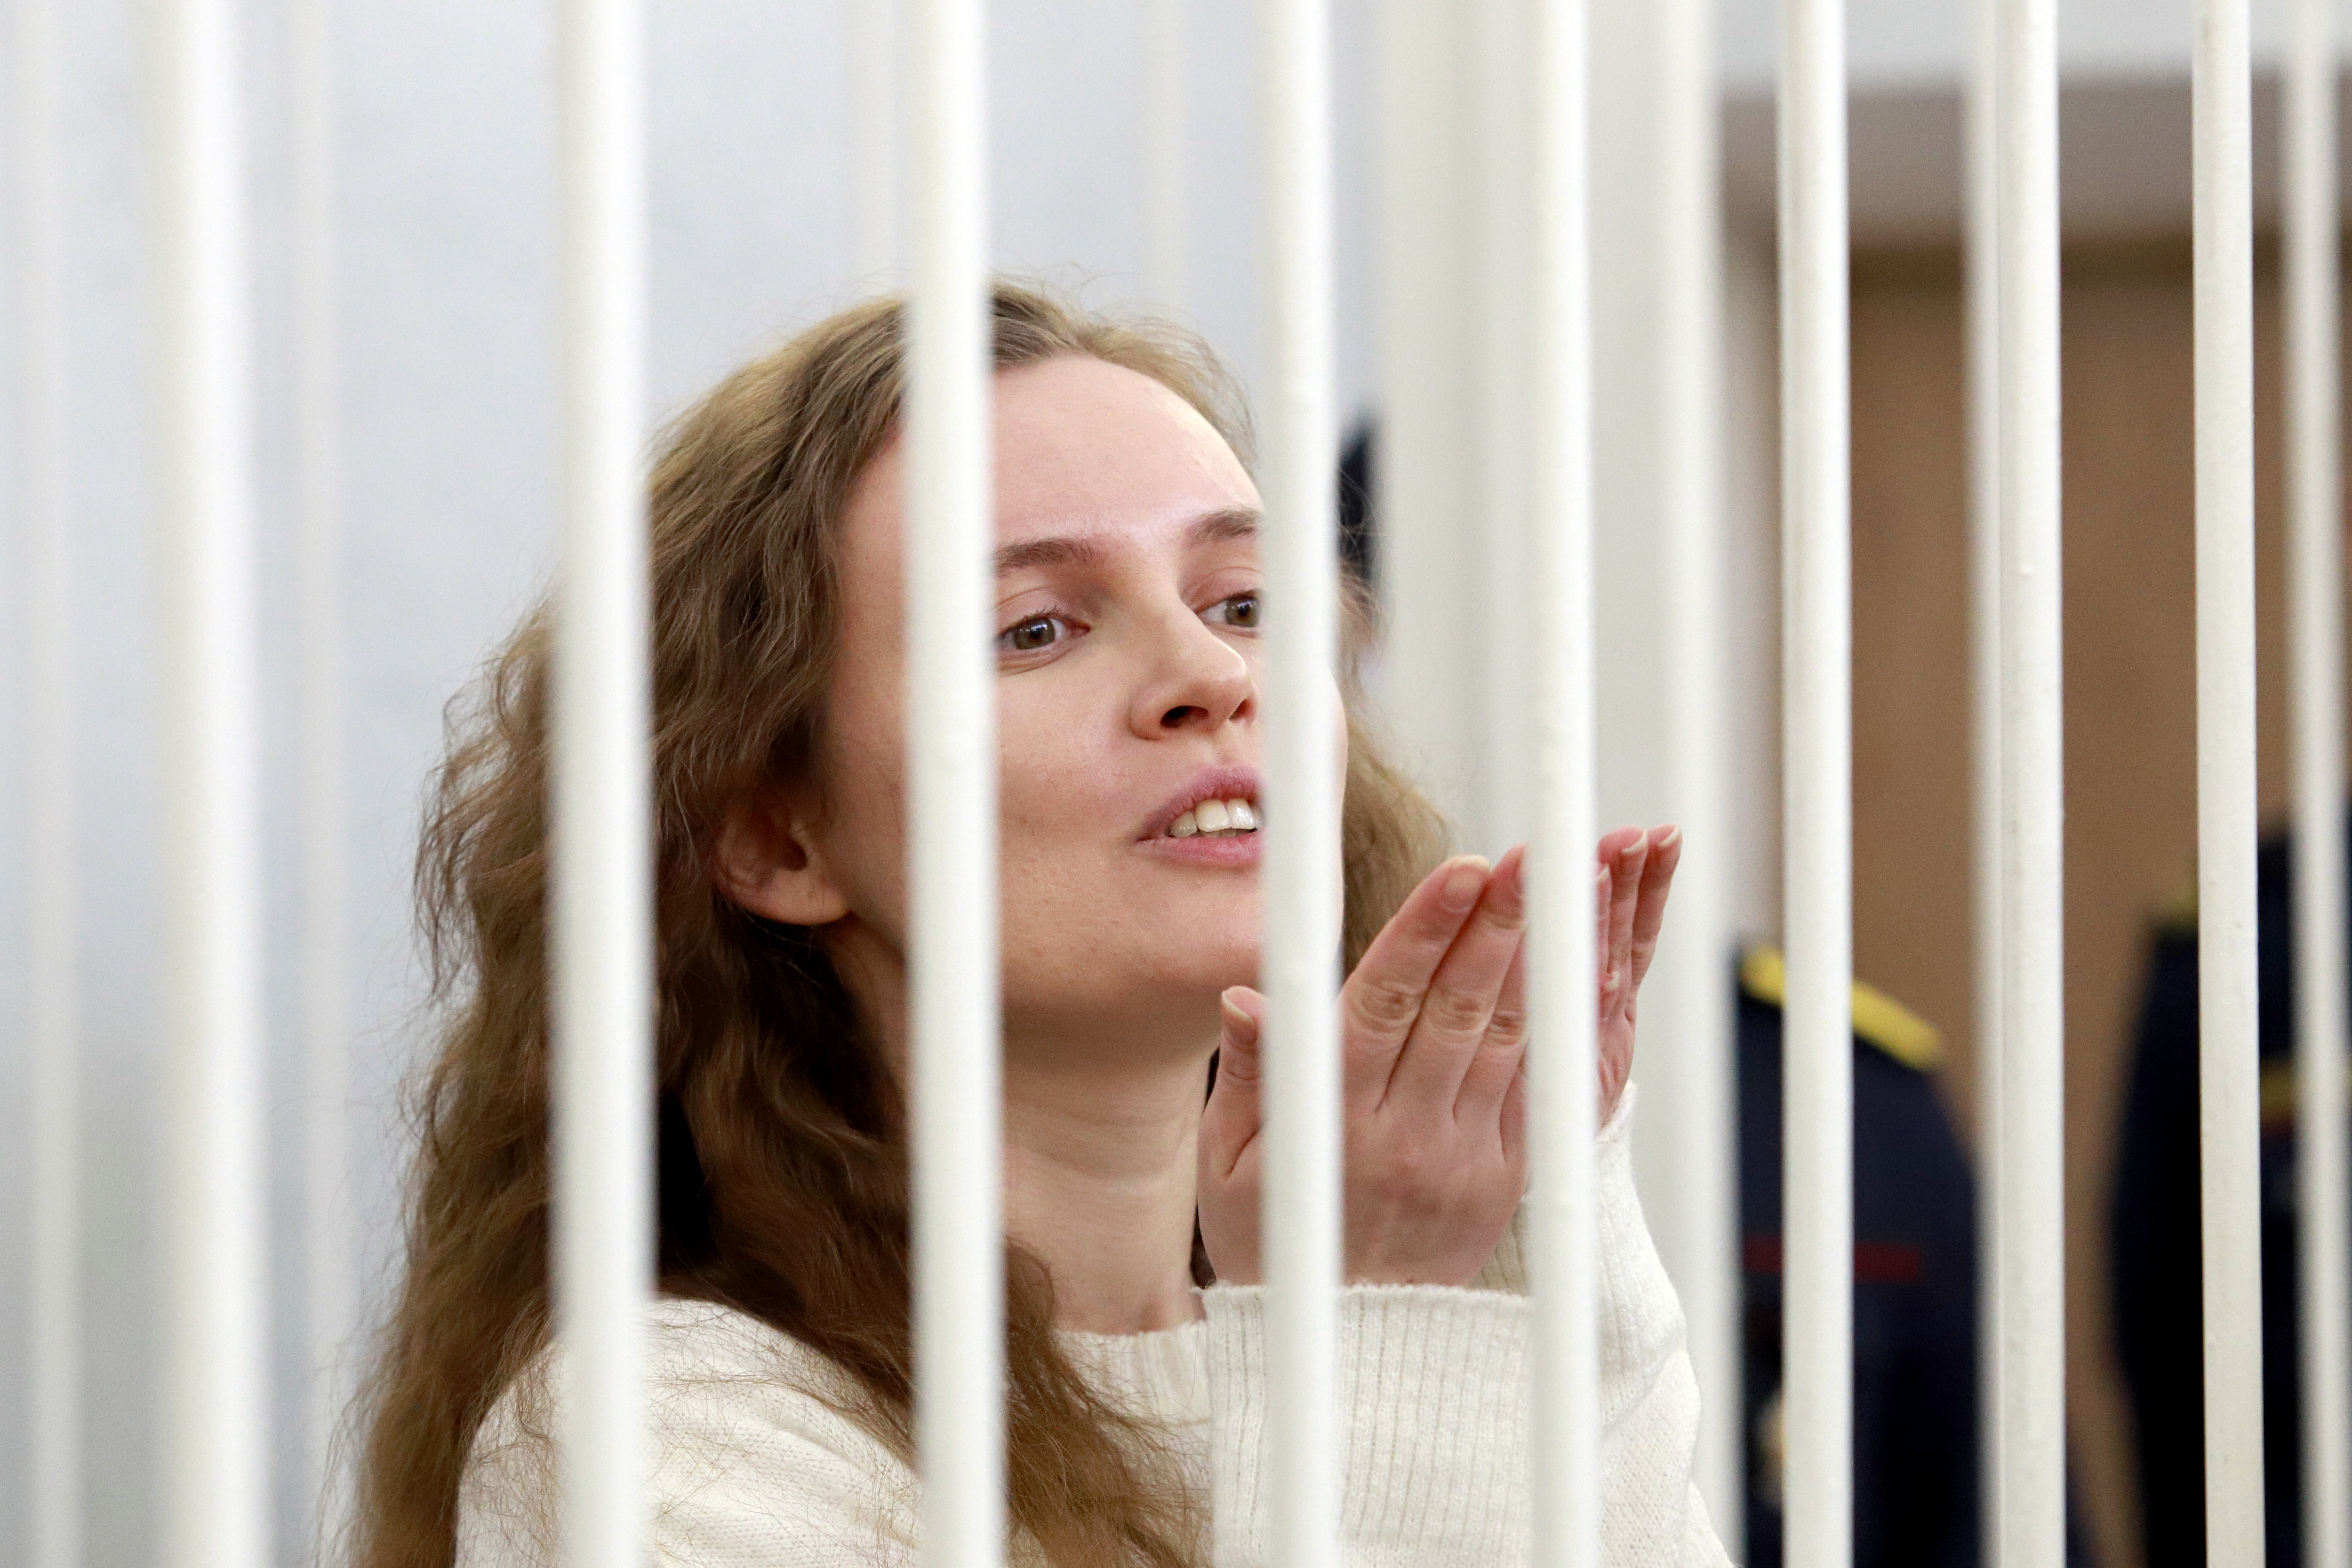 belarus journalists jailed for covering anti-government protests gestures  